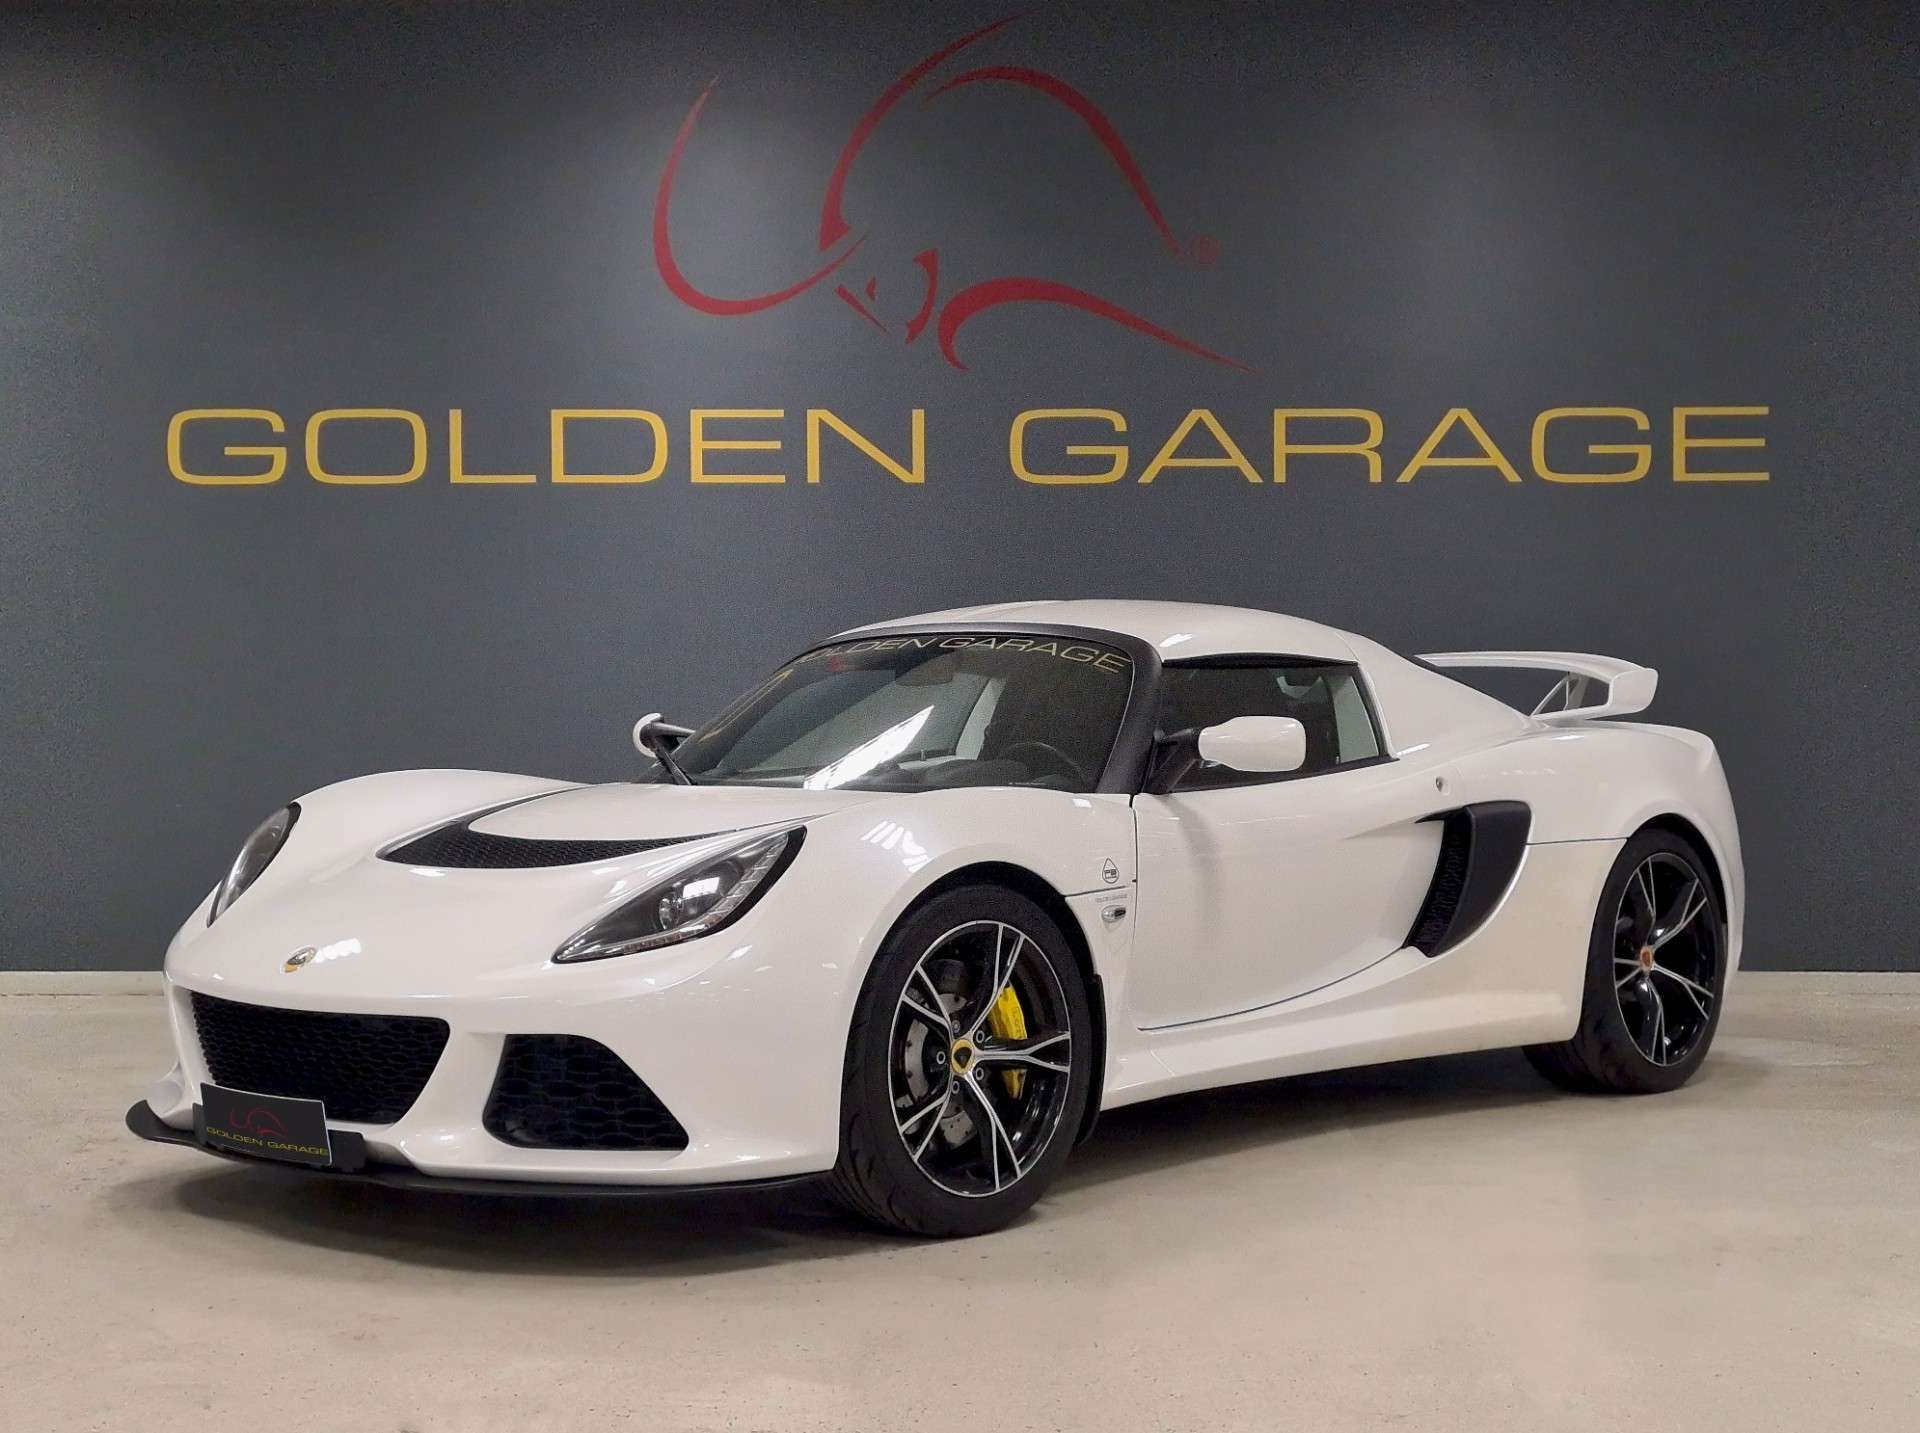 Lotus Exige Coupe in White used in Moncalieri - Torino - To for € 85,900.-